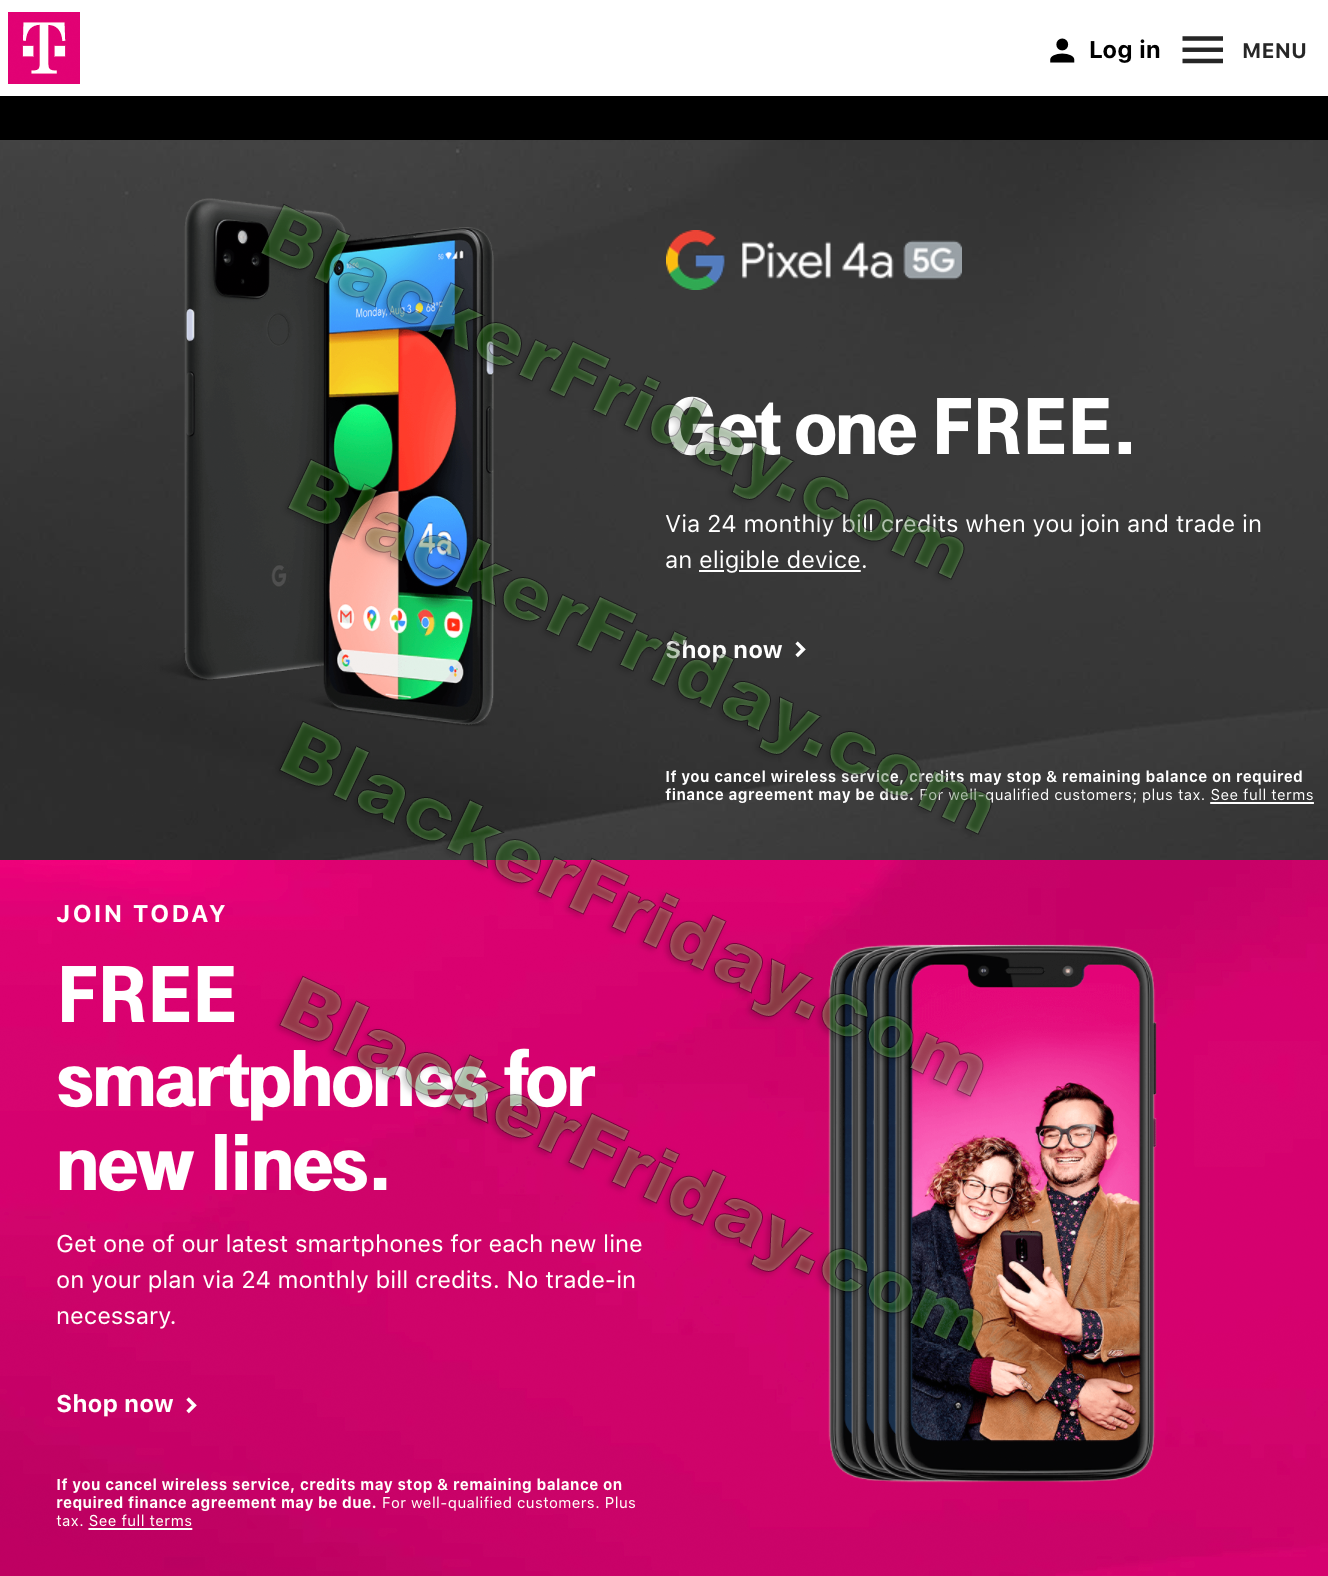 T-Mobile Black Friday 2021 Sale - What to Expect - Blacker Friday - What Is Tmobile Planning For 2021 Black Friday Sale